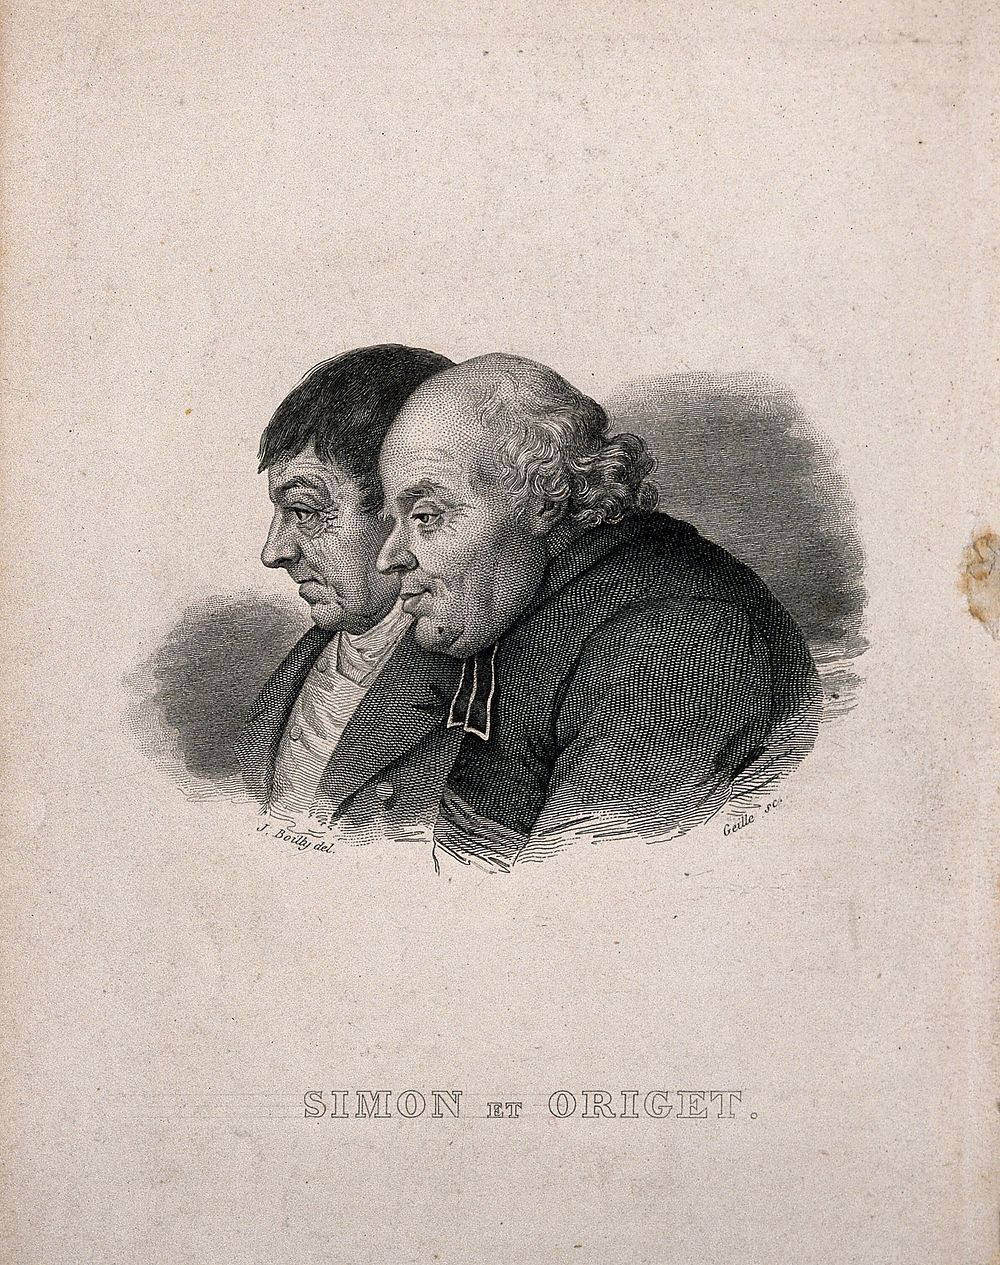 Jean Origet (left) and Nicolas Simon (right). Line engraving by A.F.B. Geille after J.-L. Boilly.